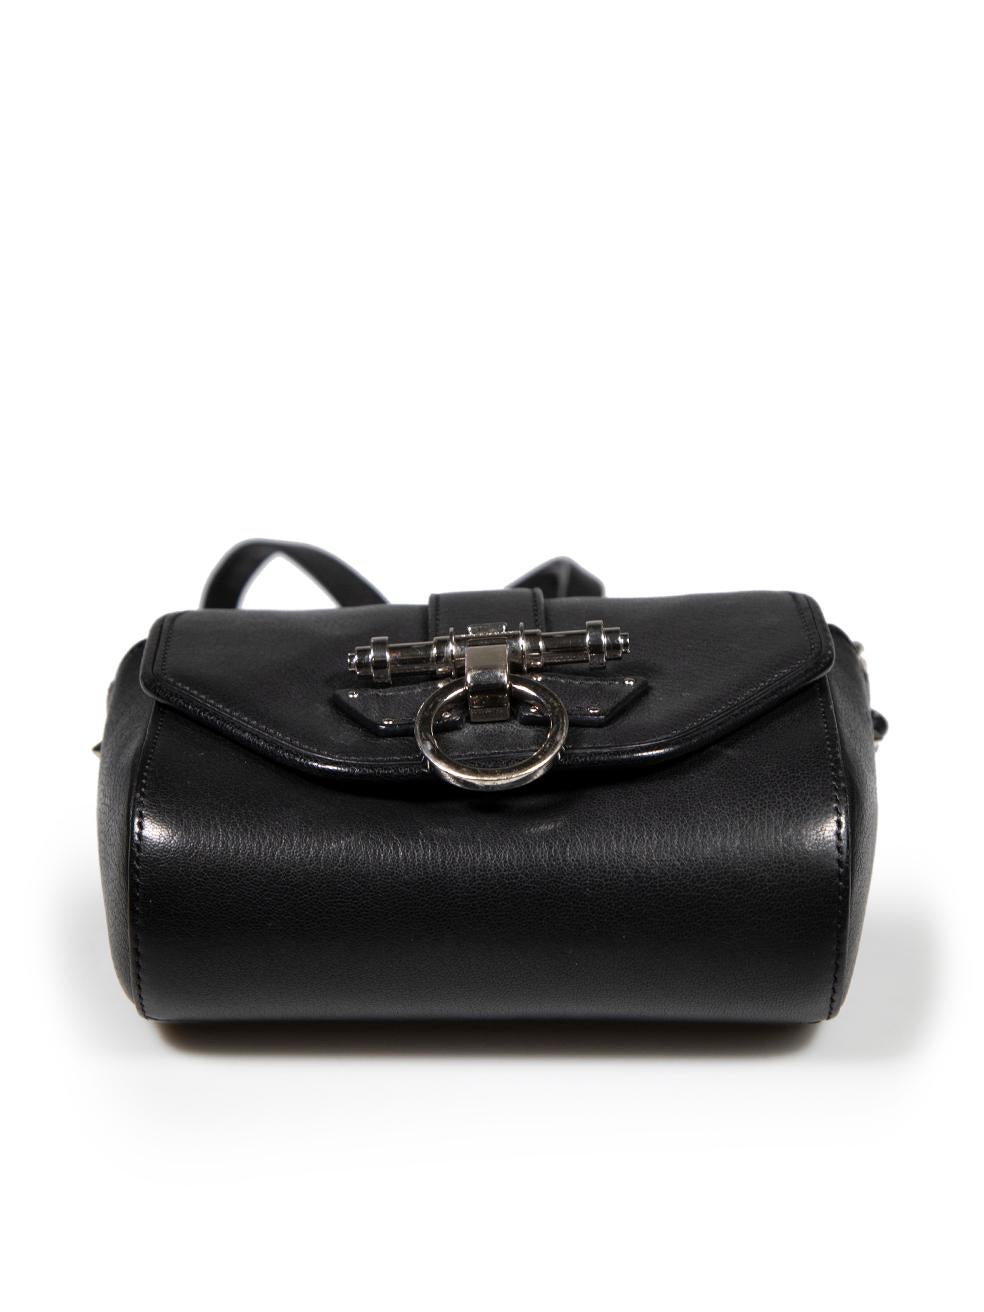 Women's Givenchy Black Leather Obsedia Crossbody Bag For Sale